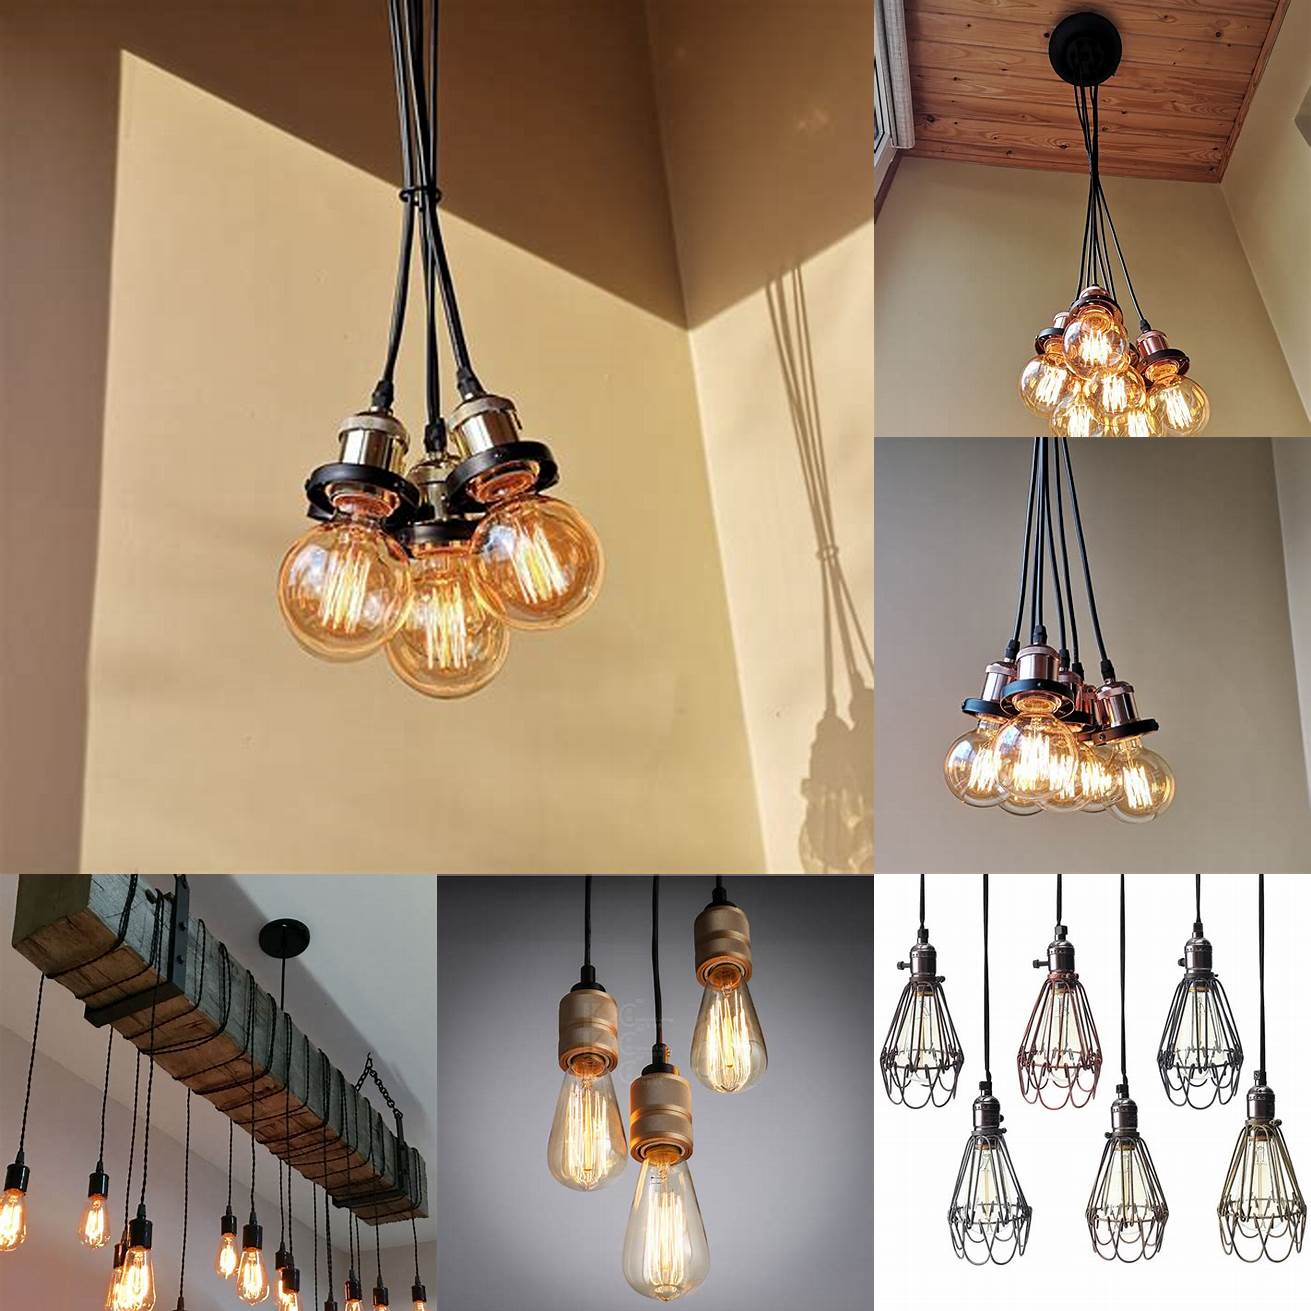 Industrial wire pendant lights with Edison bulbs